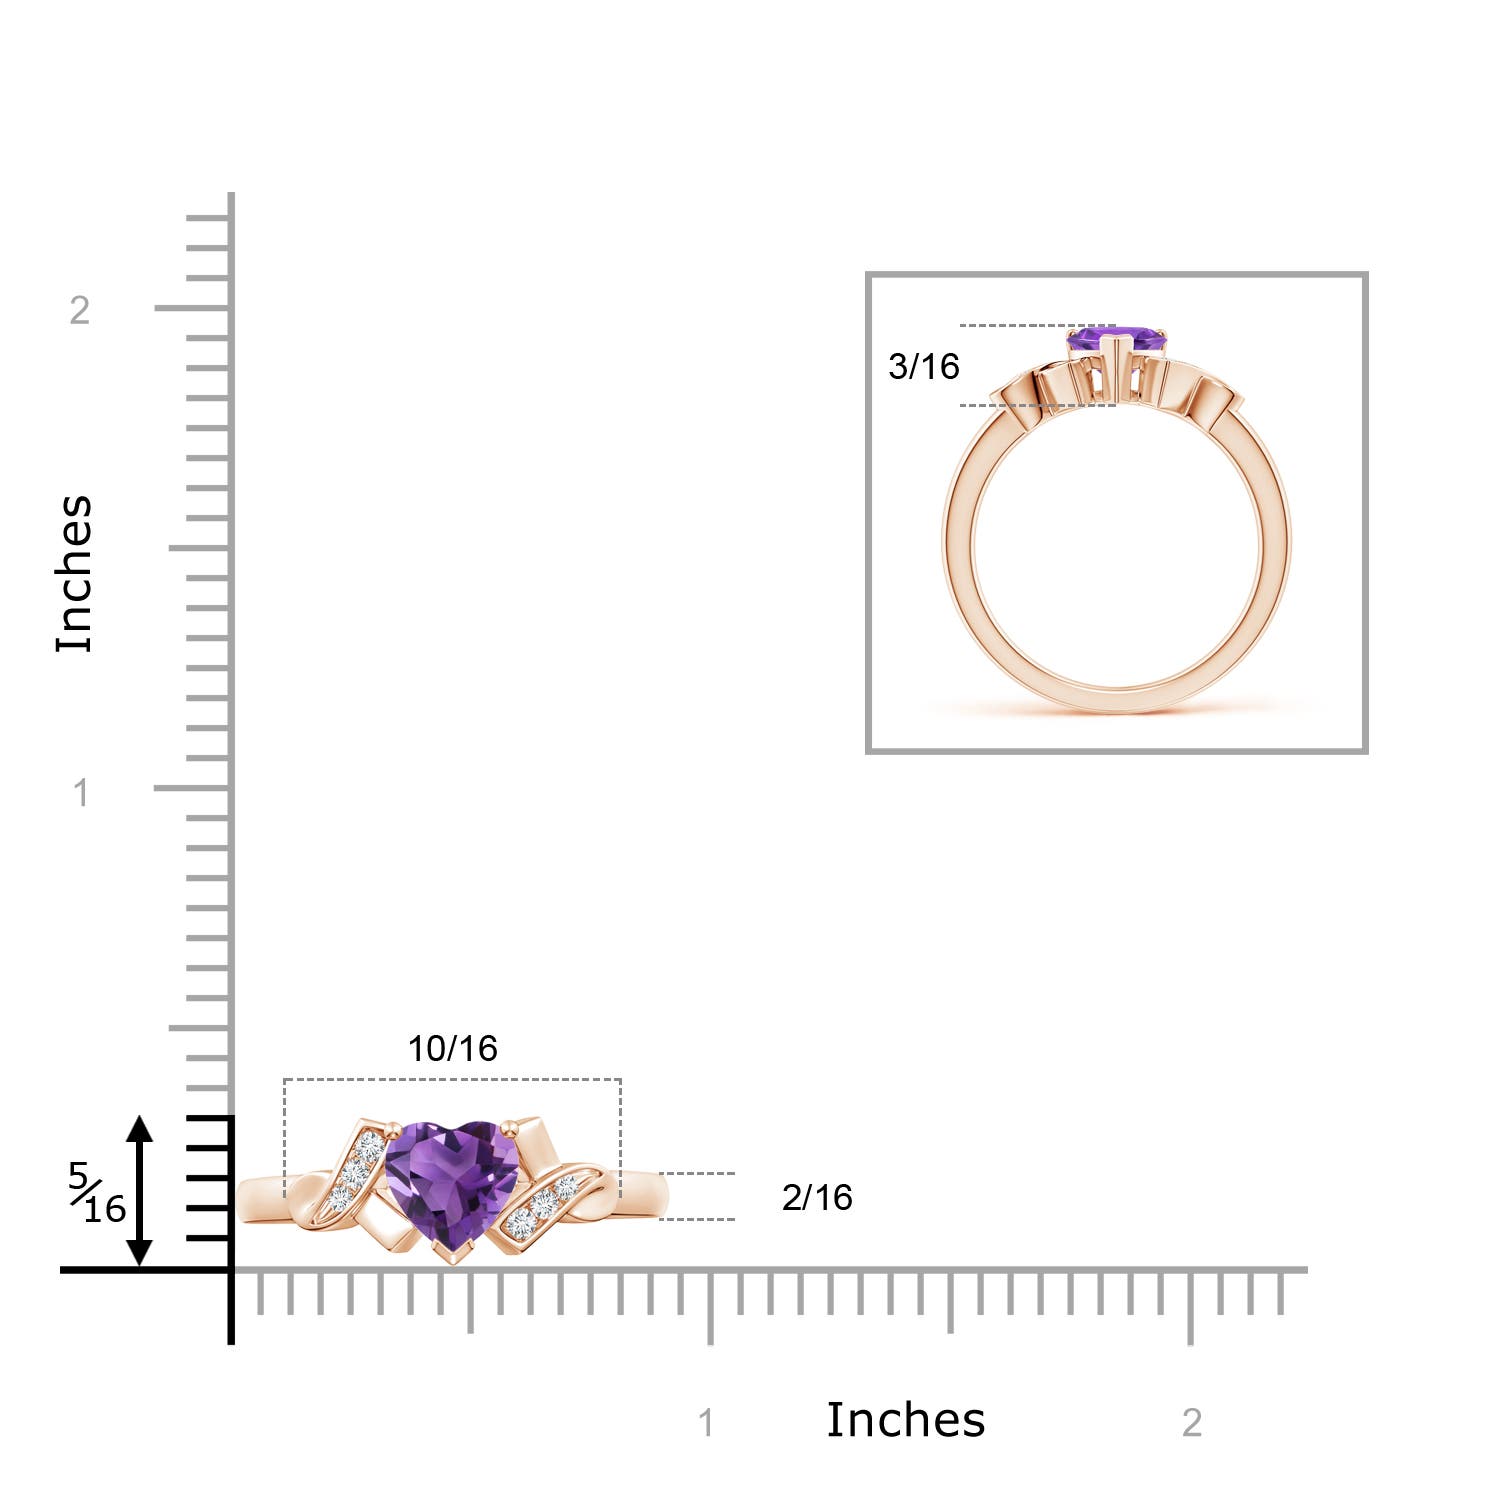 AAA - Amethyst / 0.76 CT / 14 KT Rose Gold